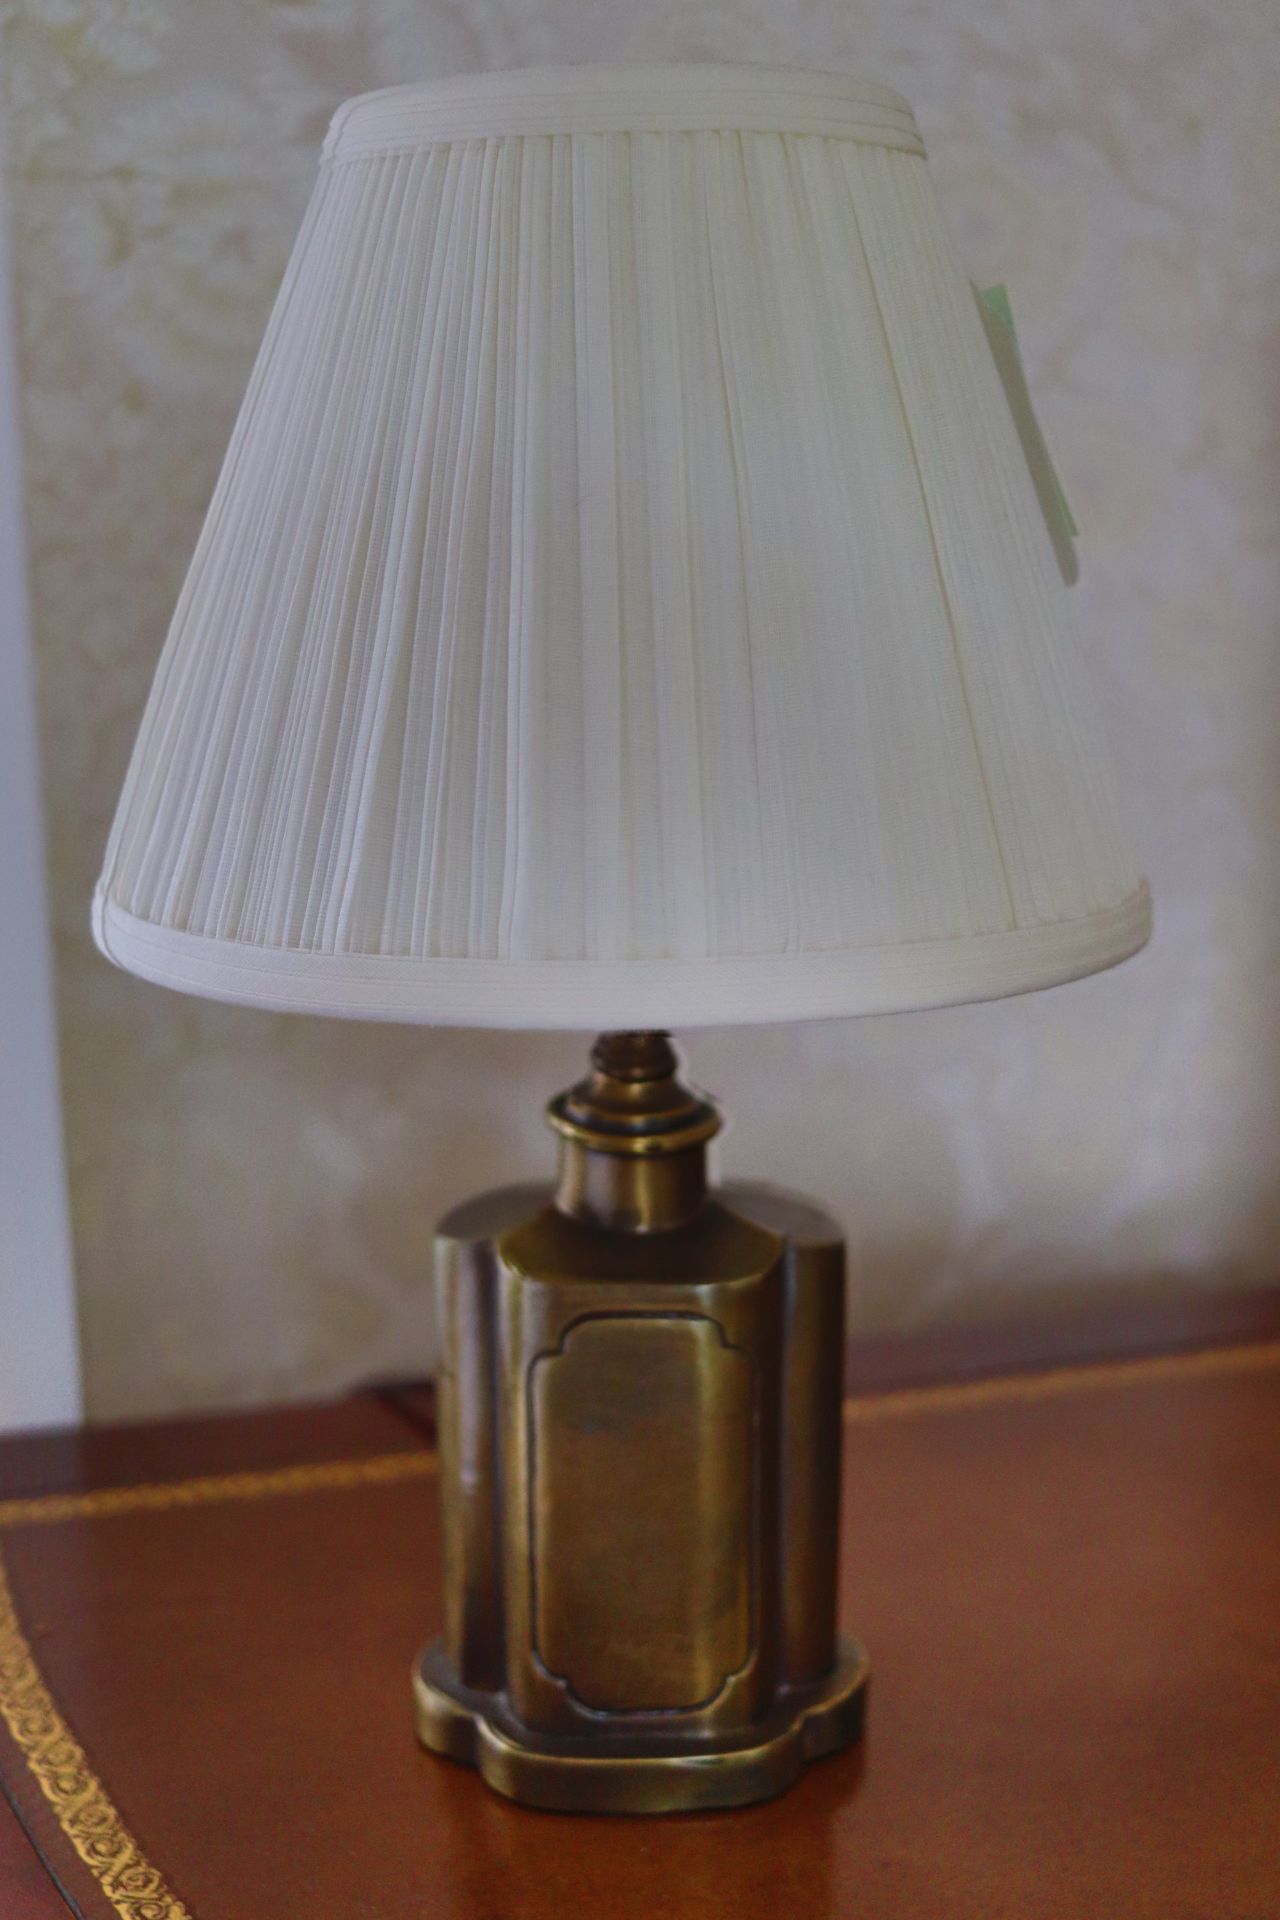 Brass table lamp, approximate height 13" - Image 2 of 2